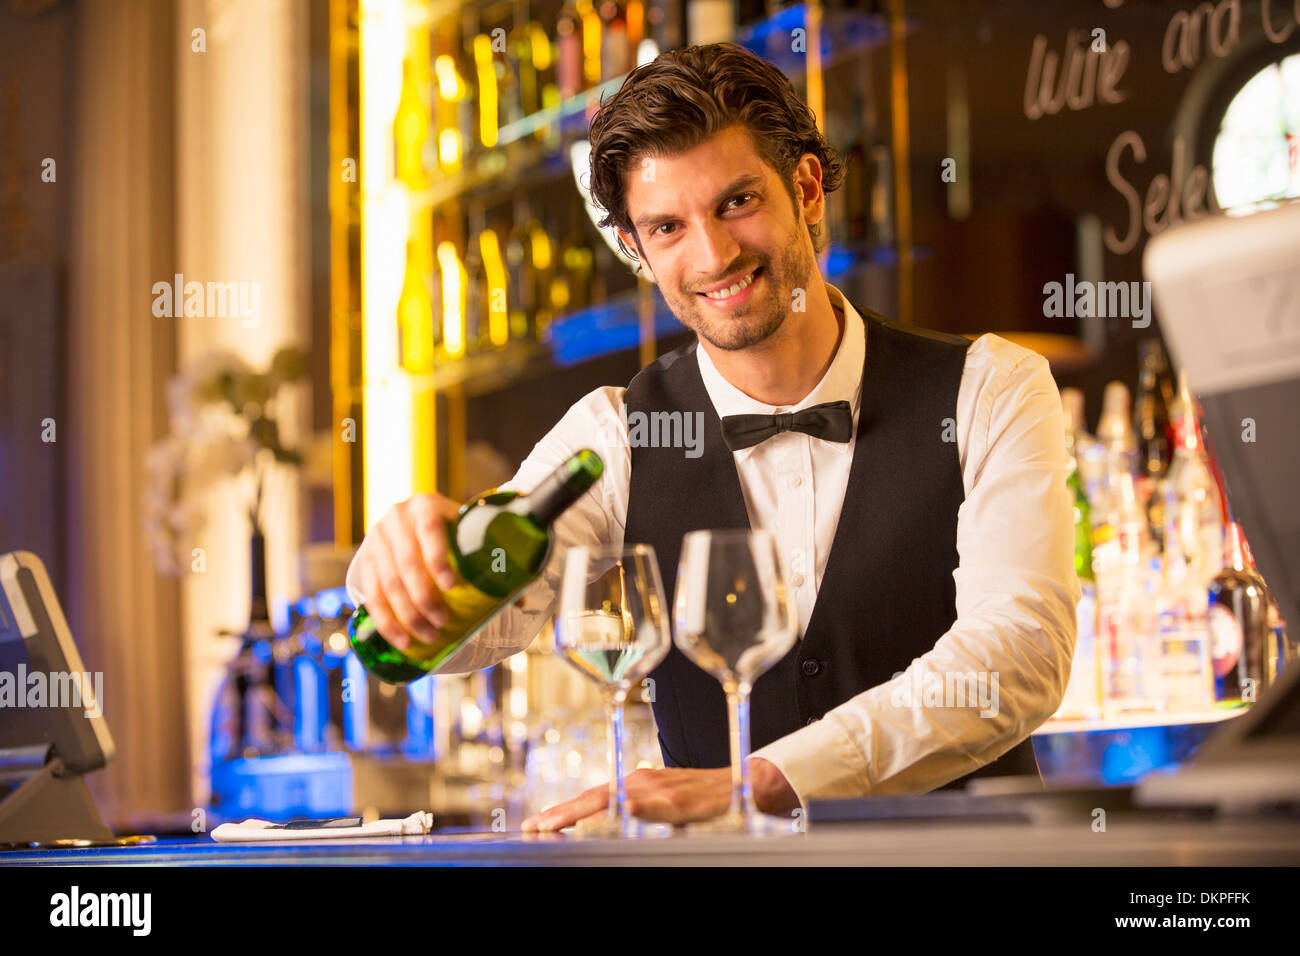 Portrait of well dressed bartender pouring wine in luxury bar Stock Photo